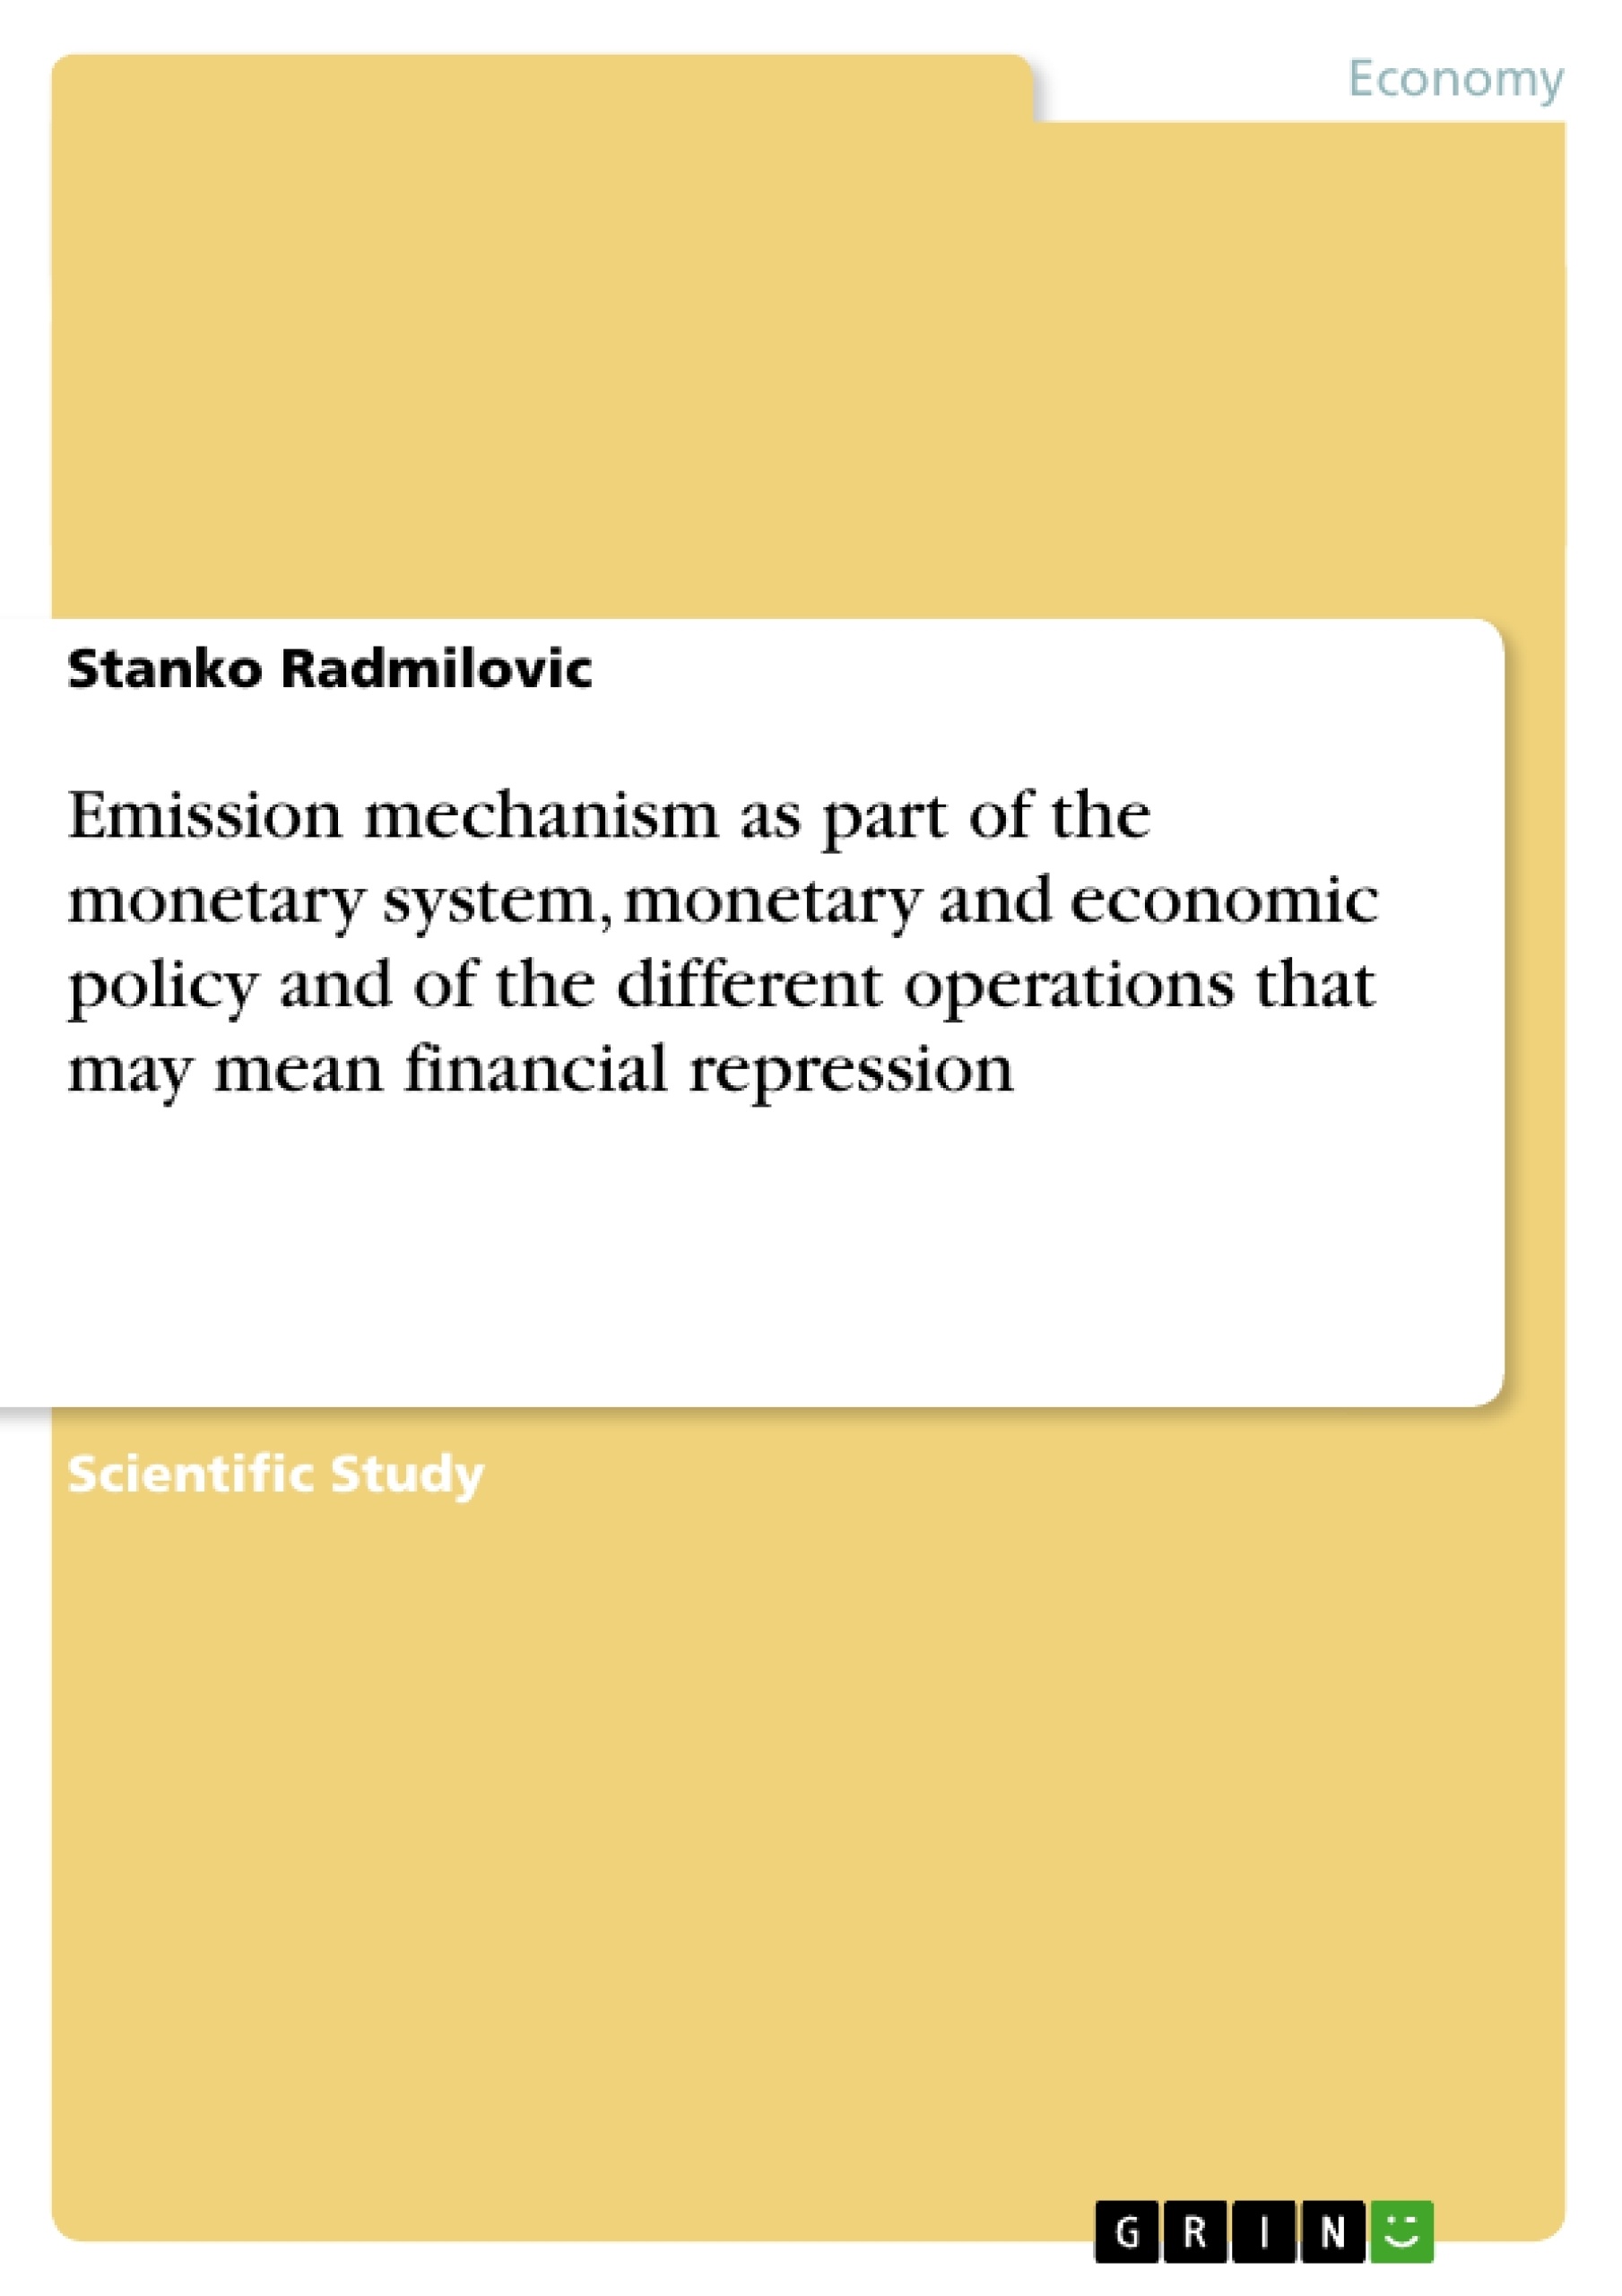 Title: Emission mechanism as part of the monetary system, monetary and economic policy and of the different operations that may mean financial repression